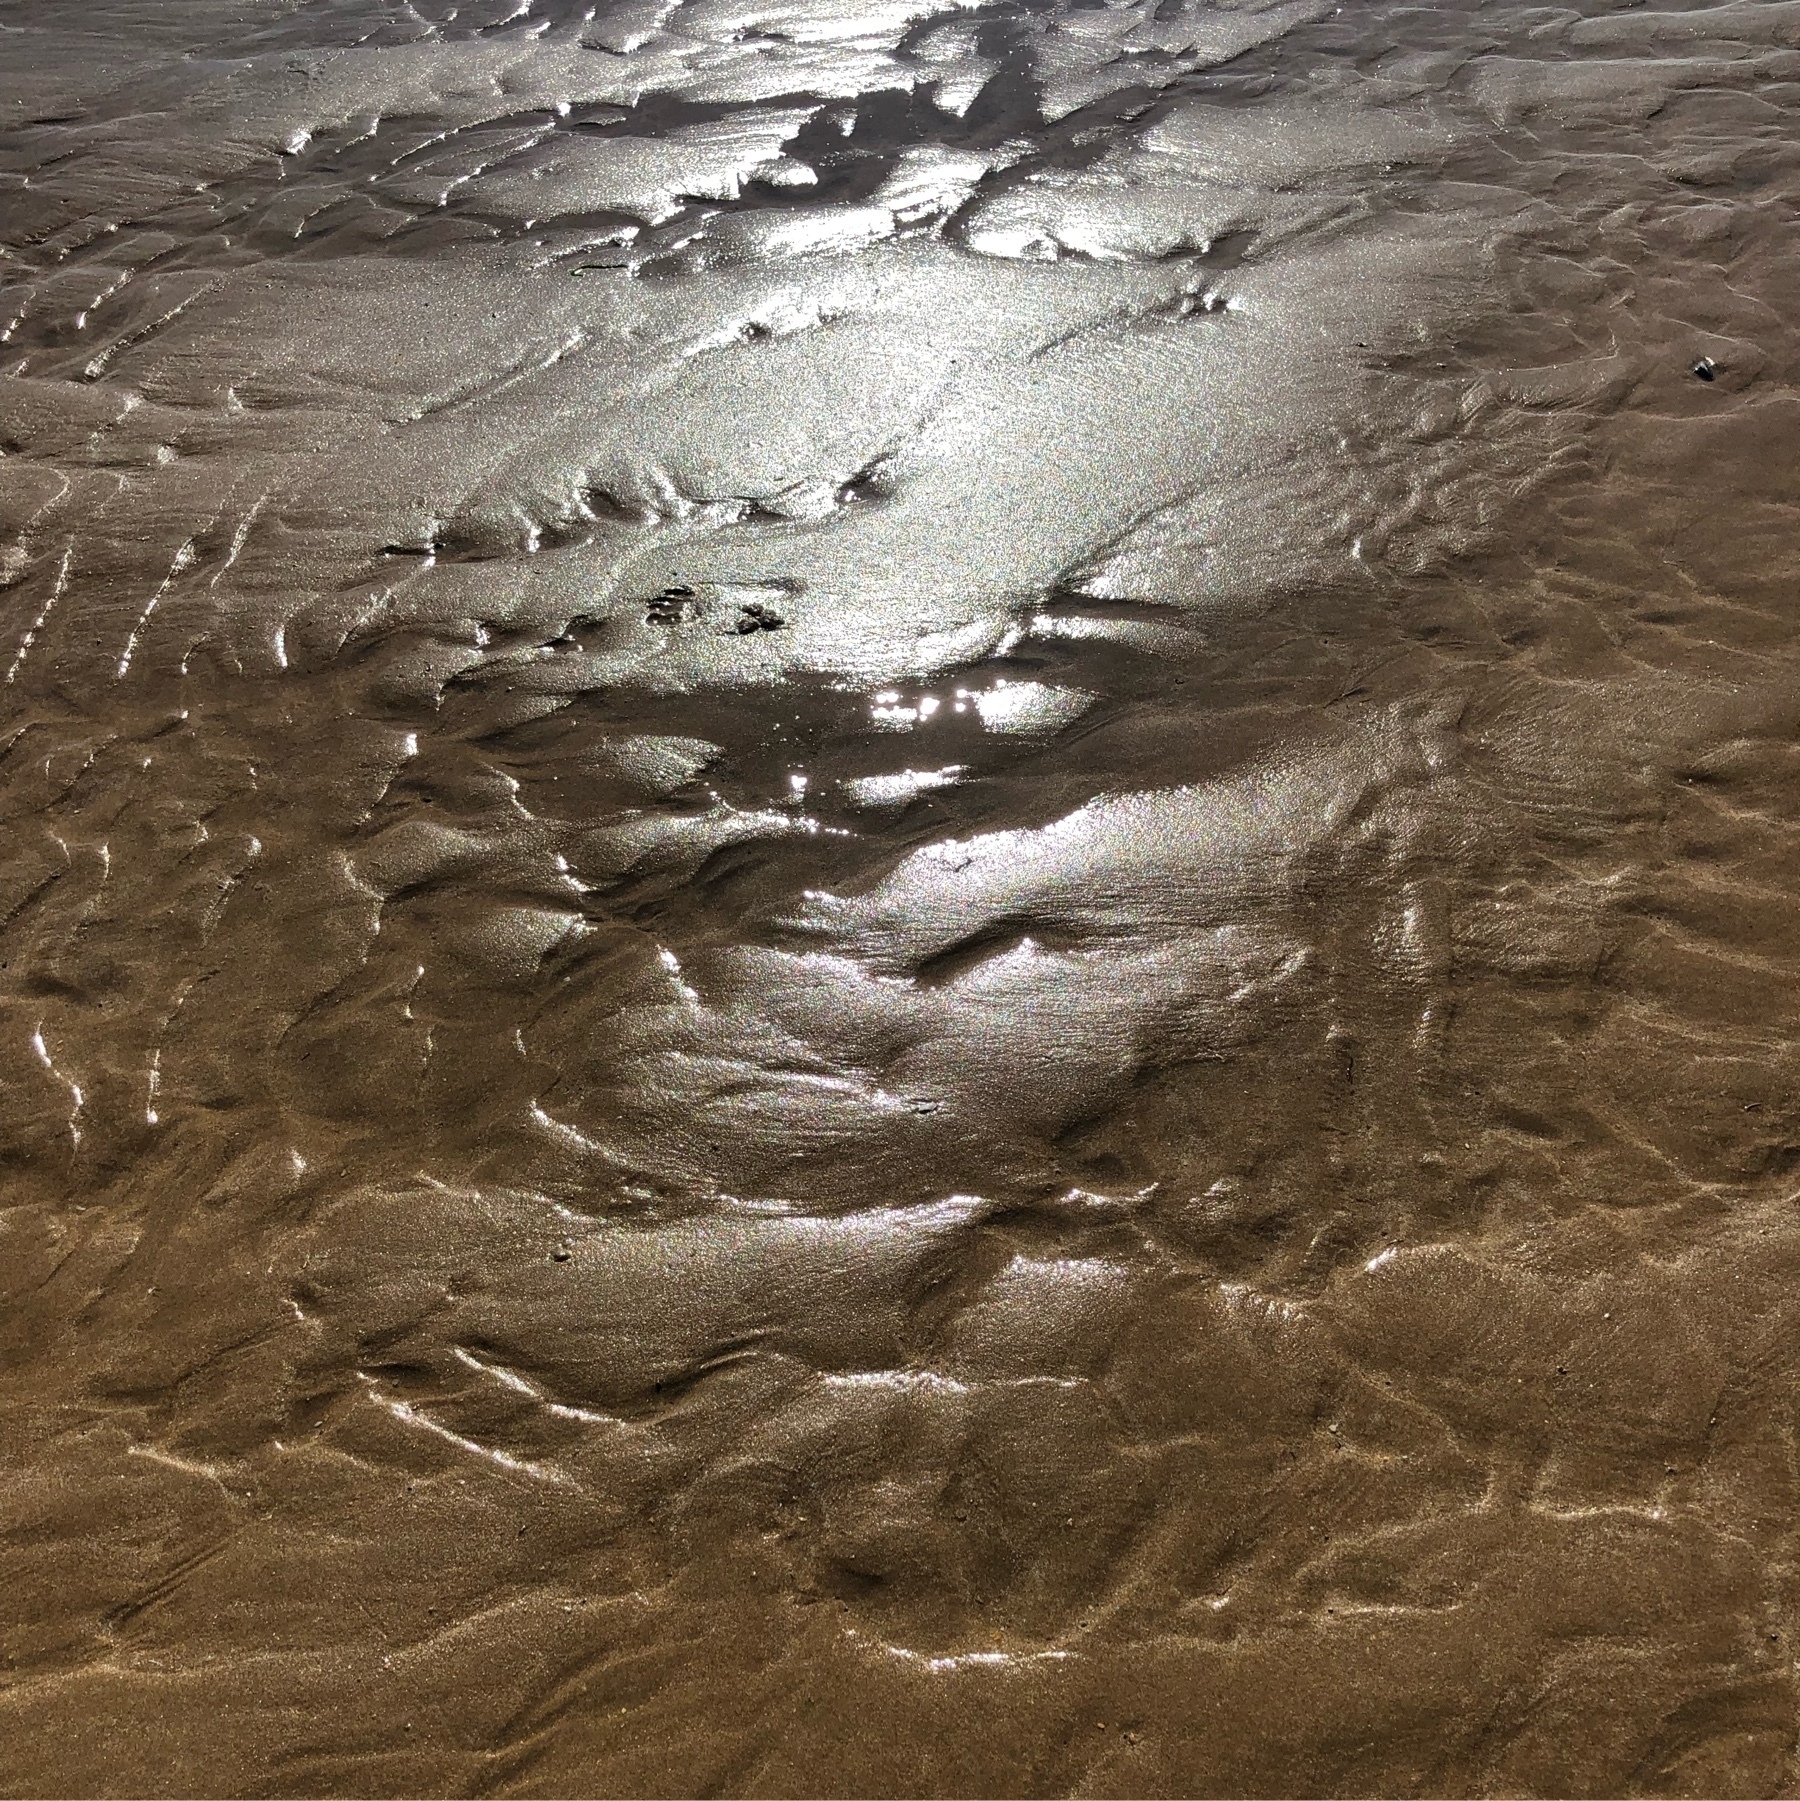 Reflection of the sun in the wet sand